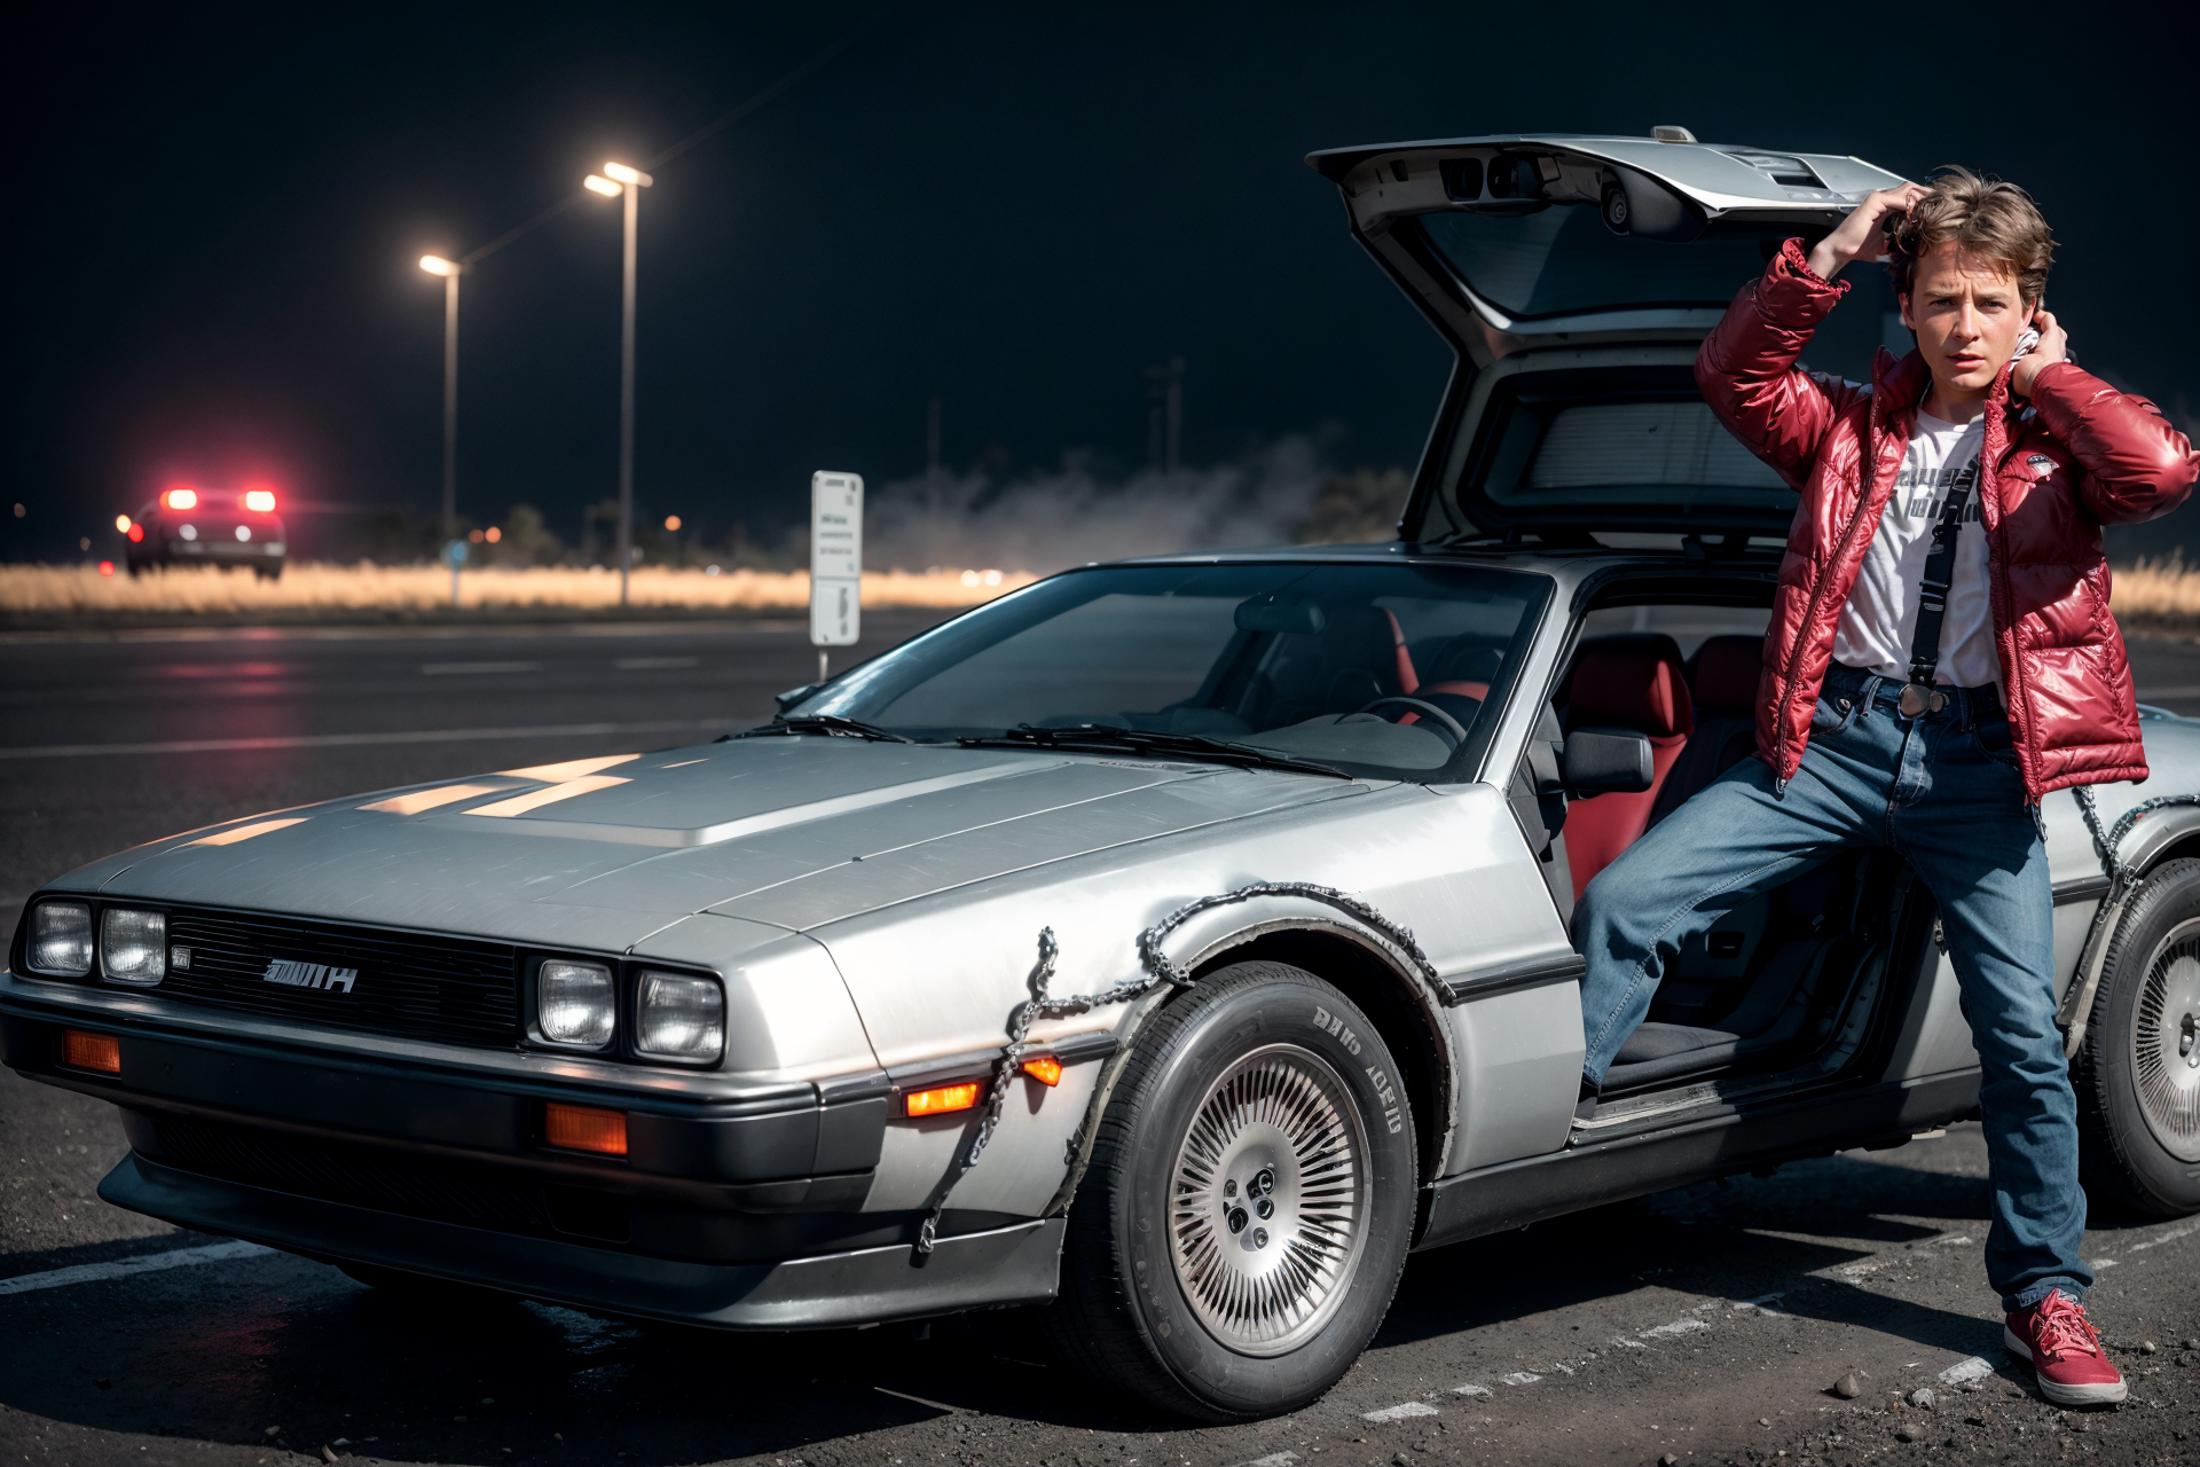 A man in a red jacket sitting in a DeLorean.